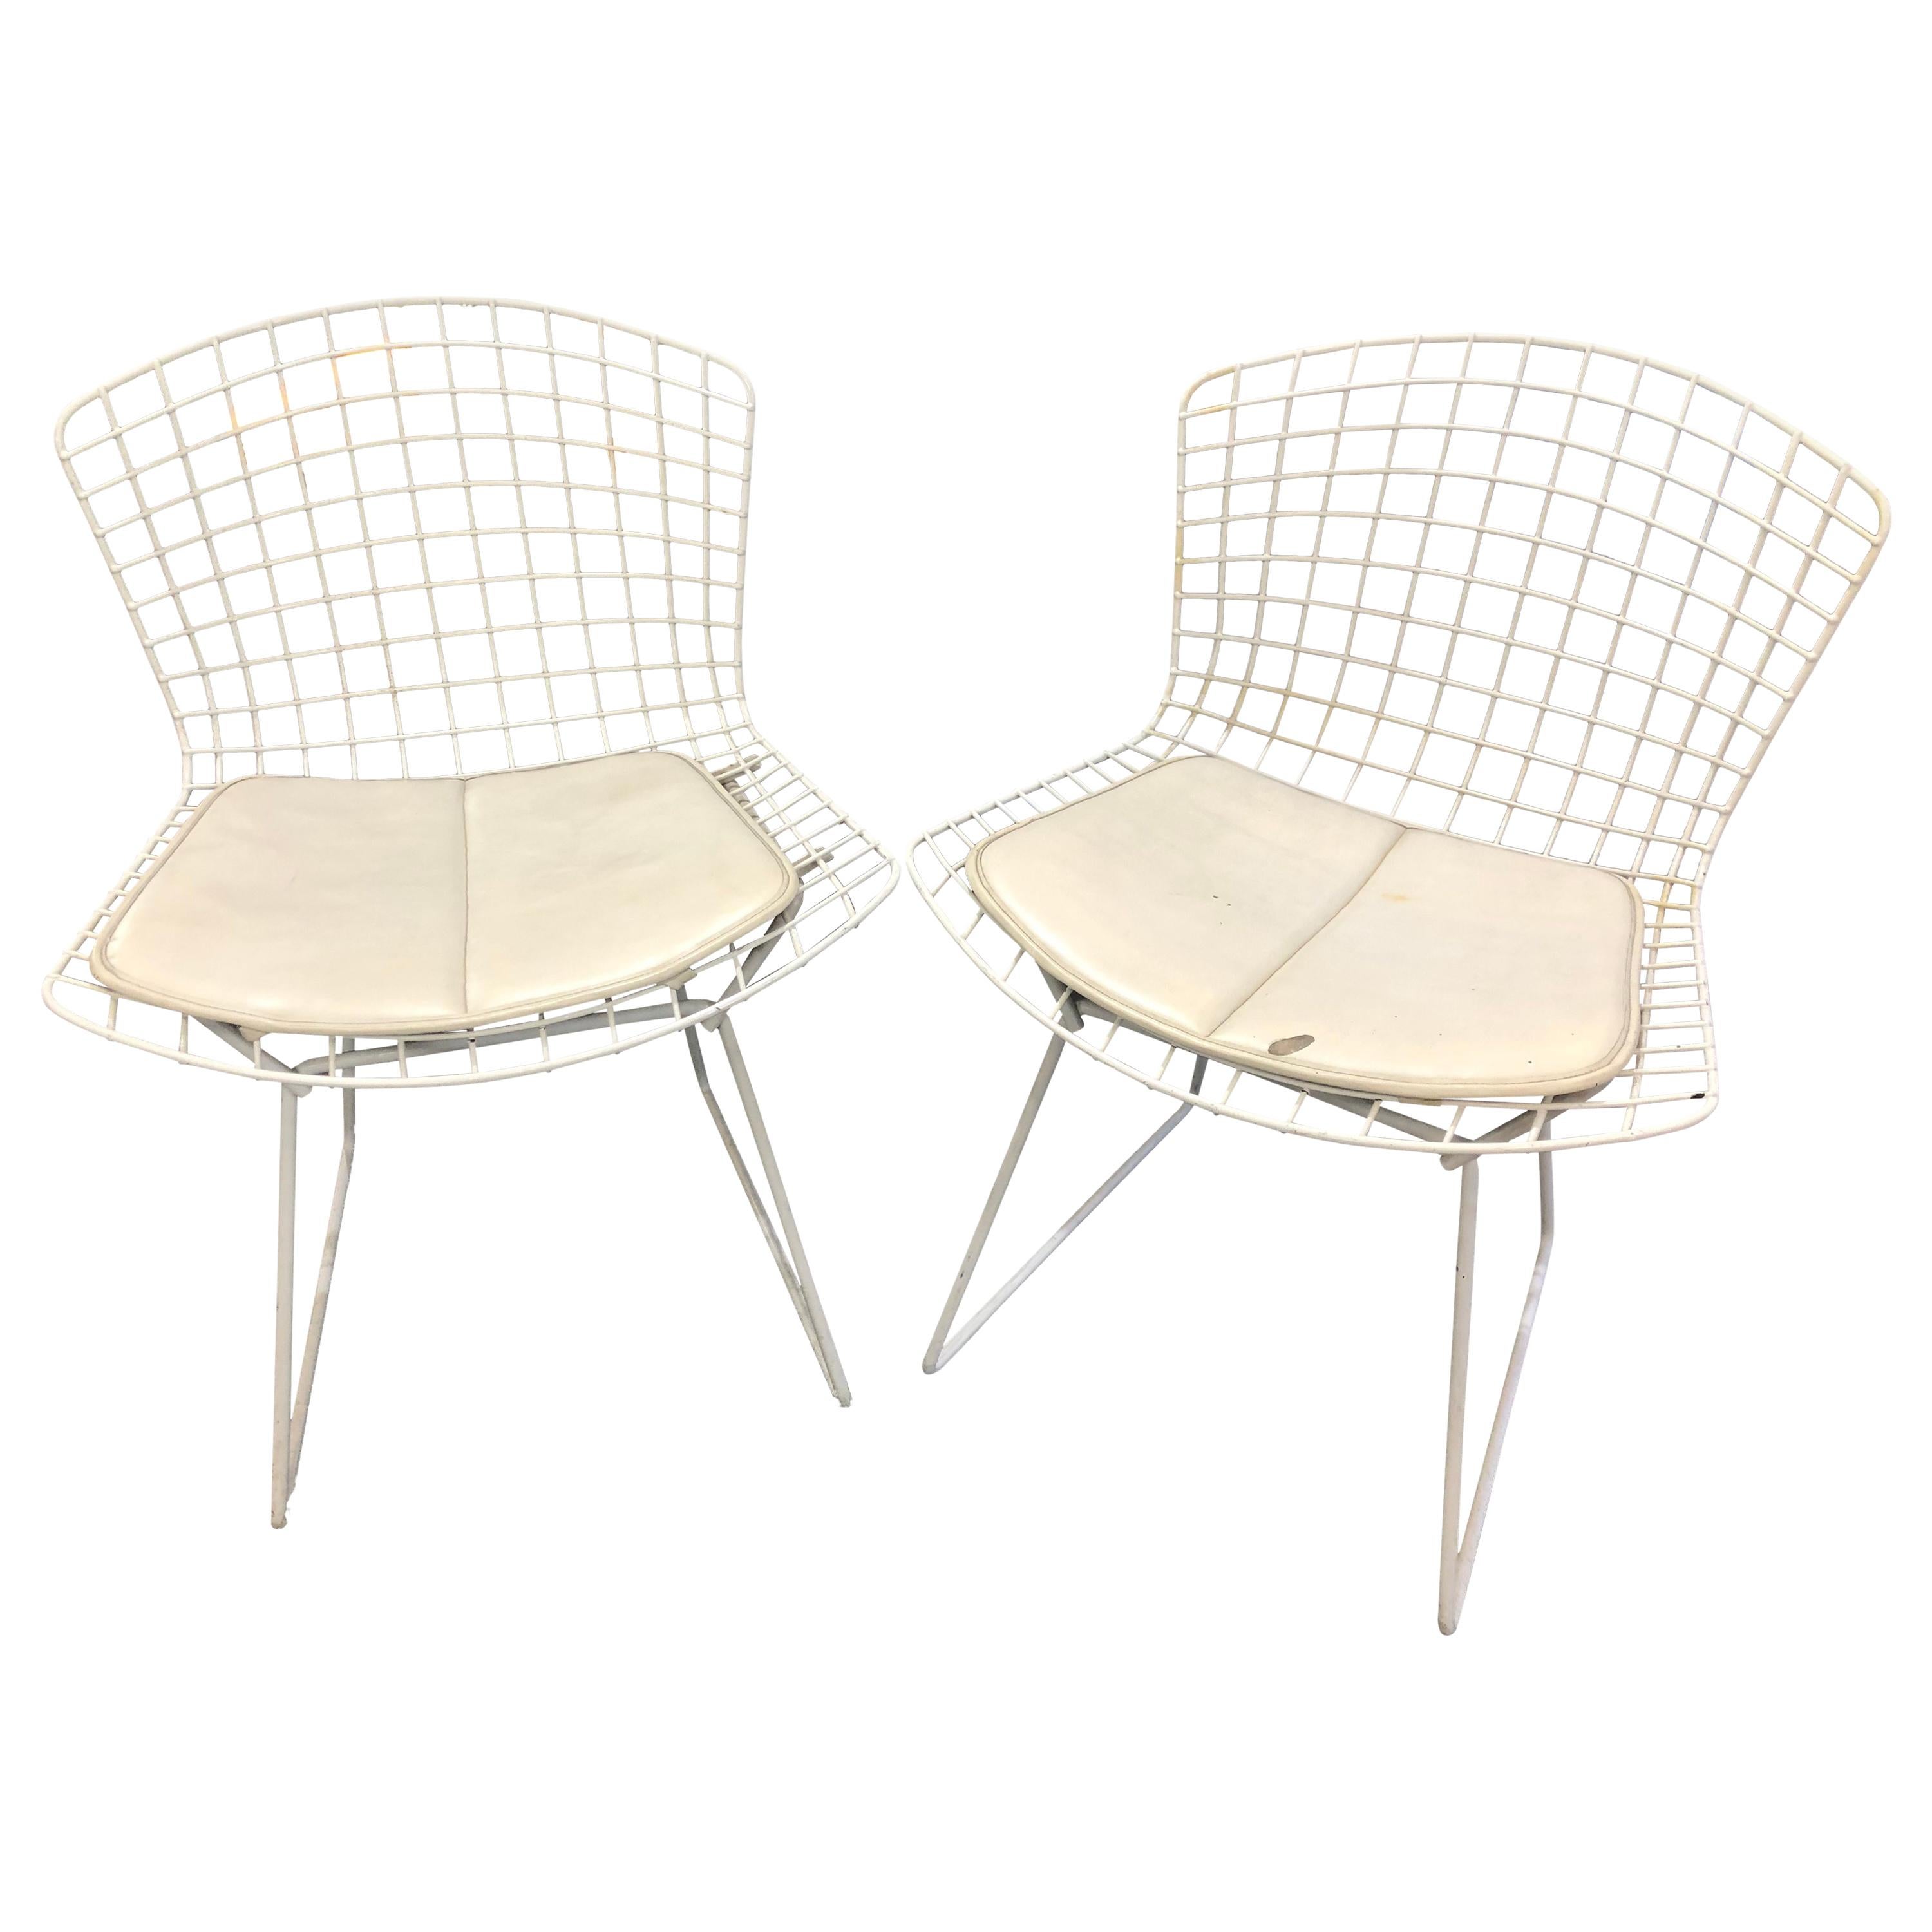 Harry Bertoïa 2 Chairs "Wire" For Sale